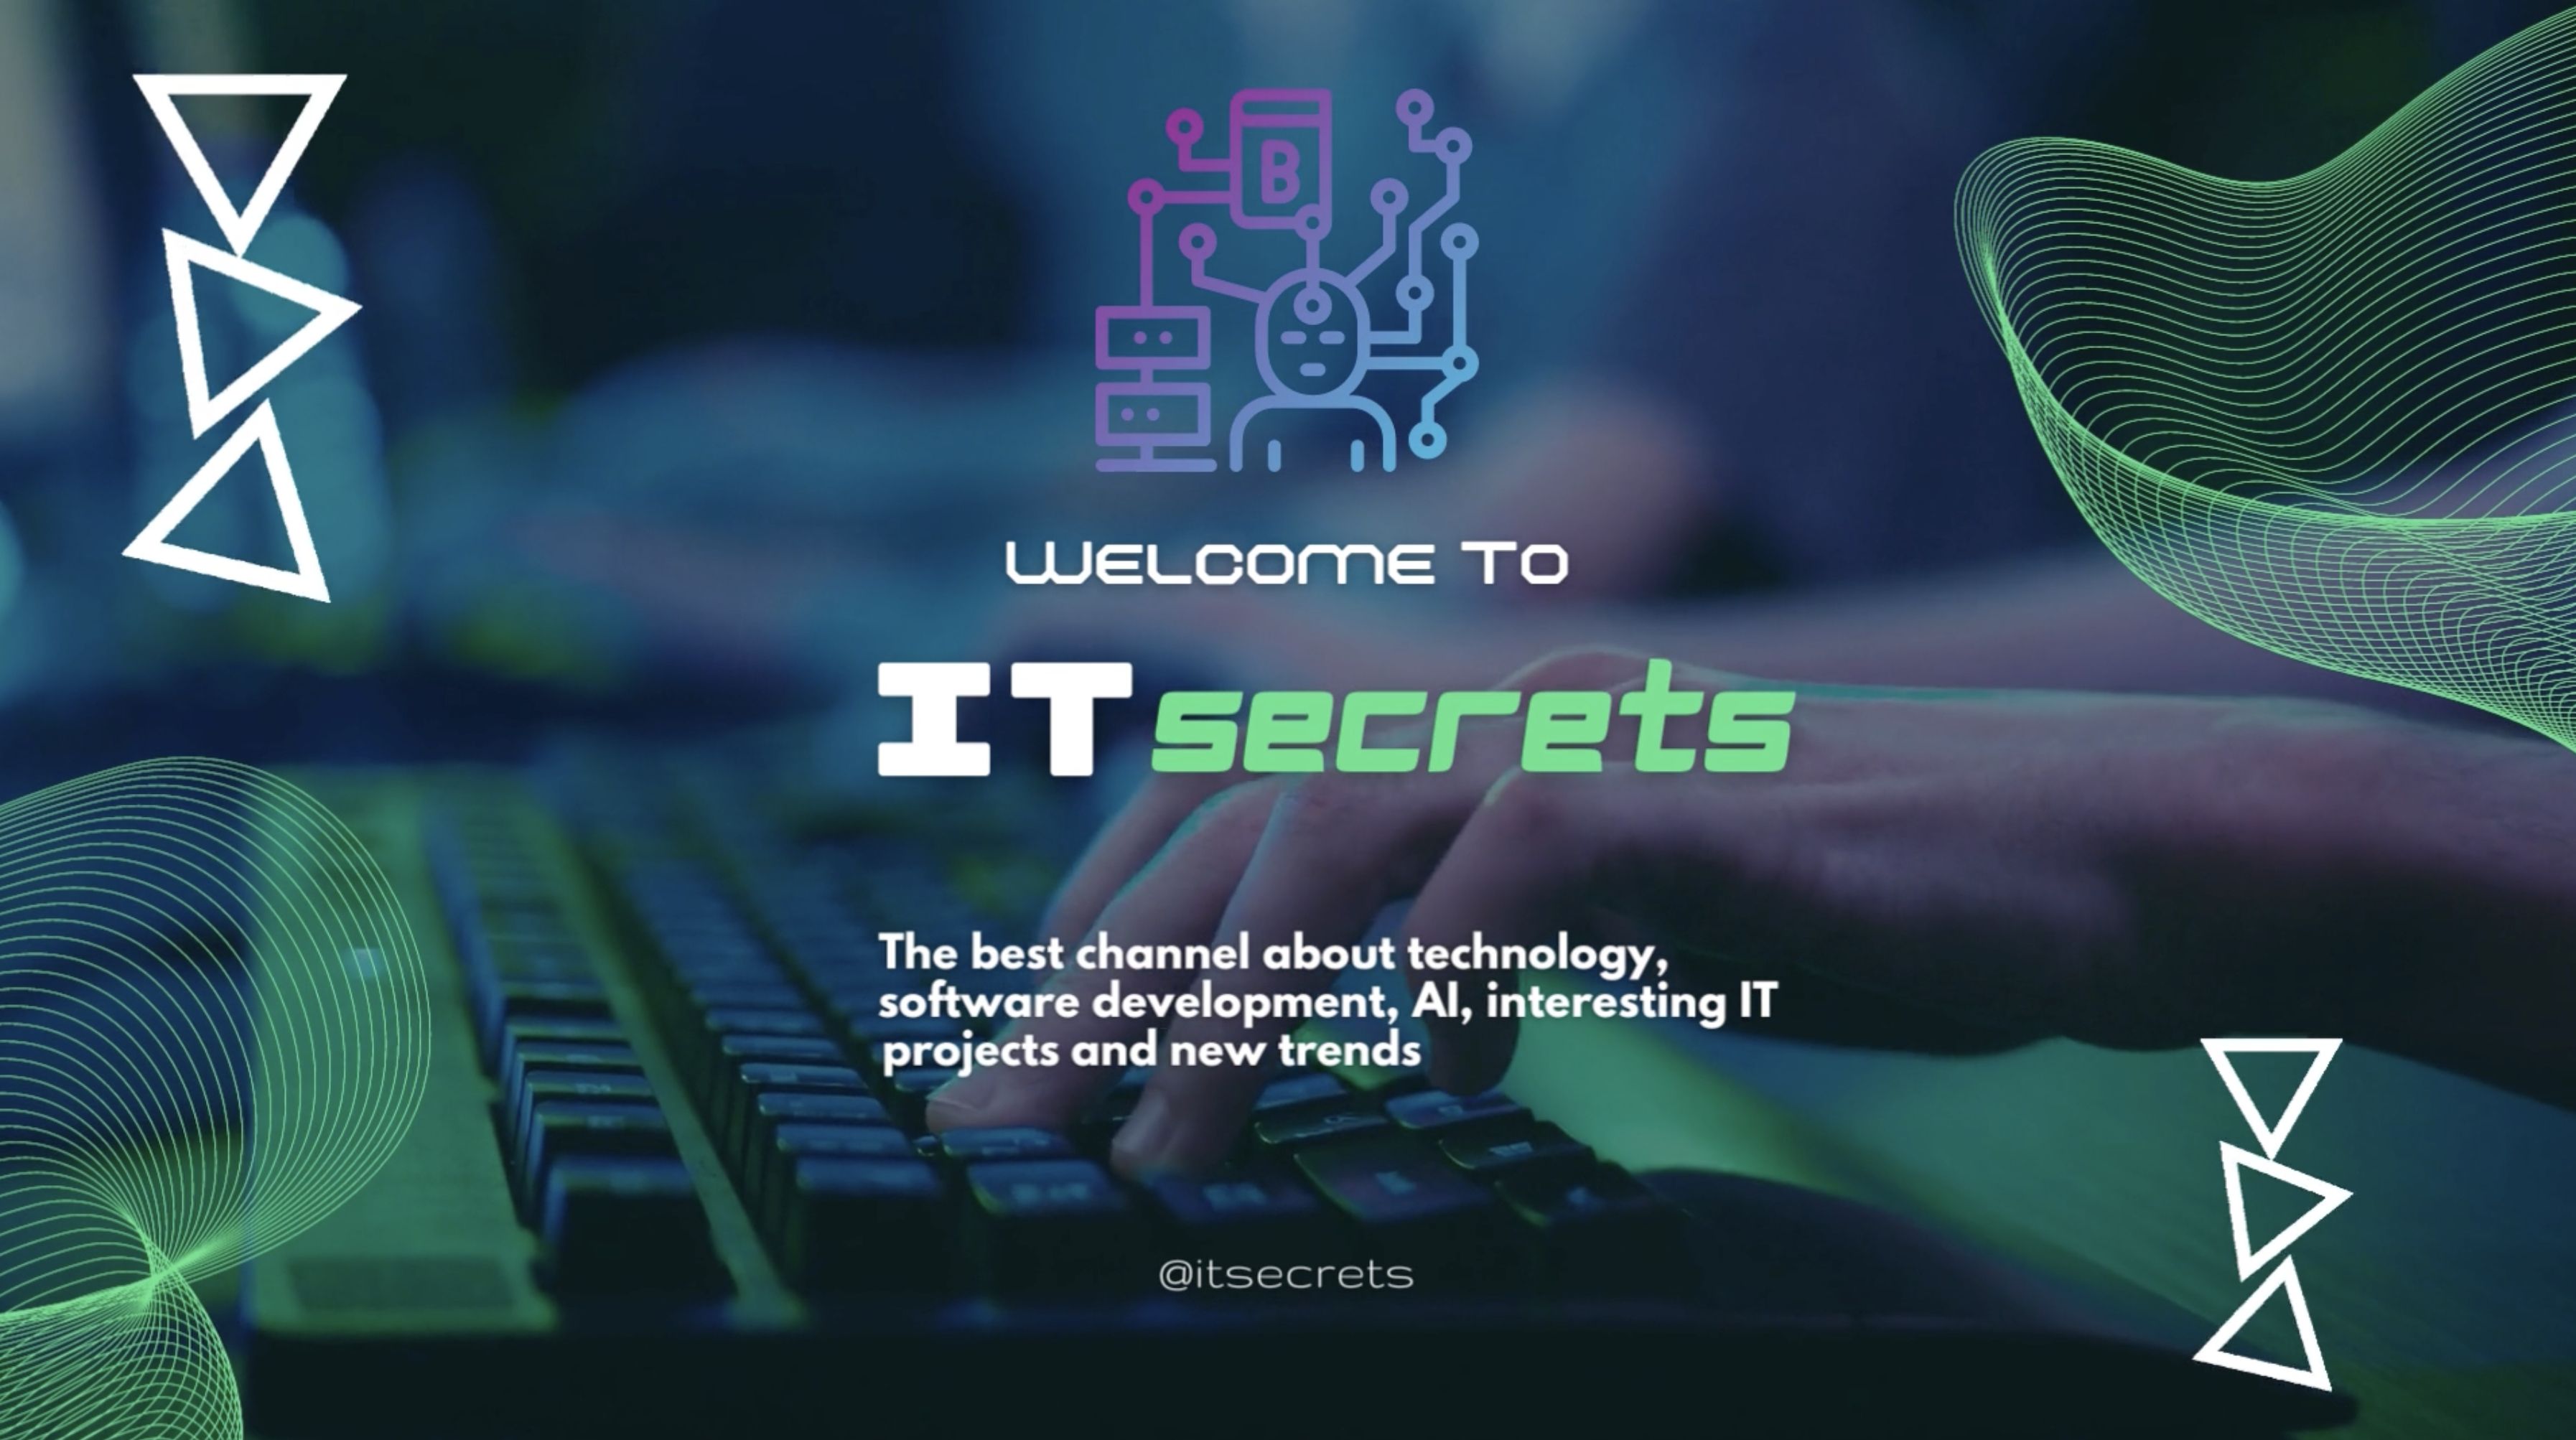 Branded videos for the @itsecrets YouTube channel